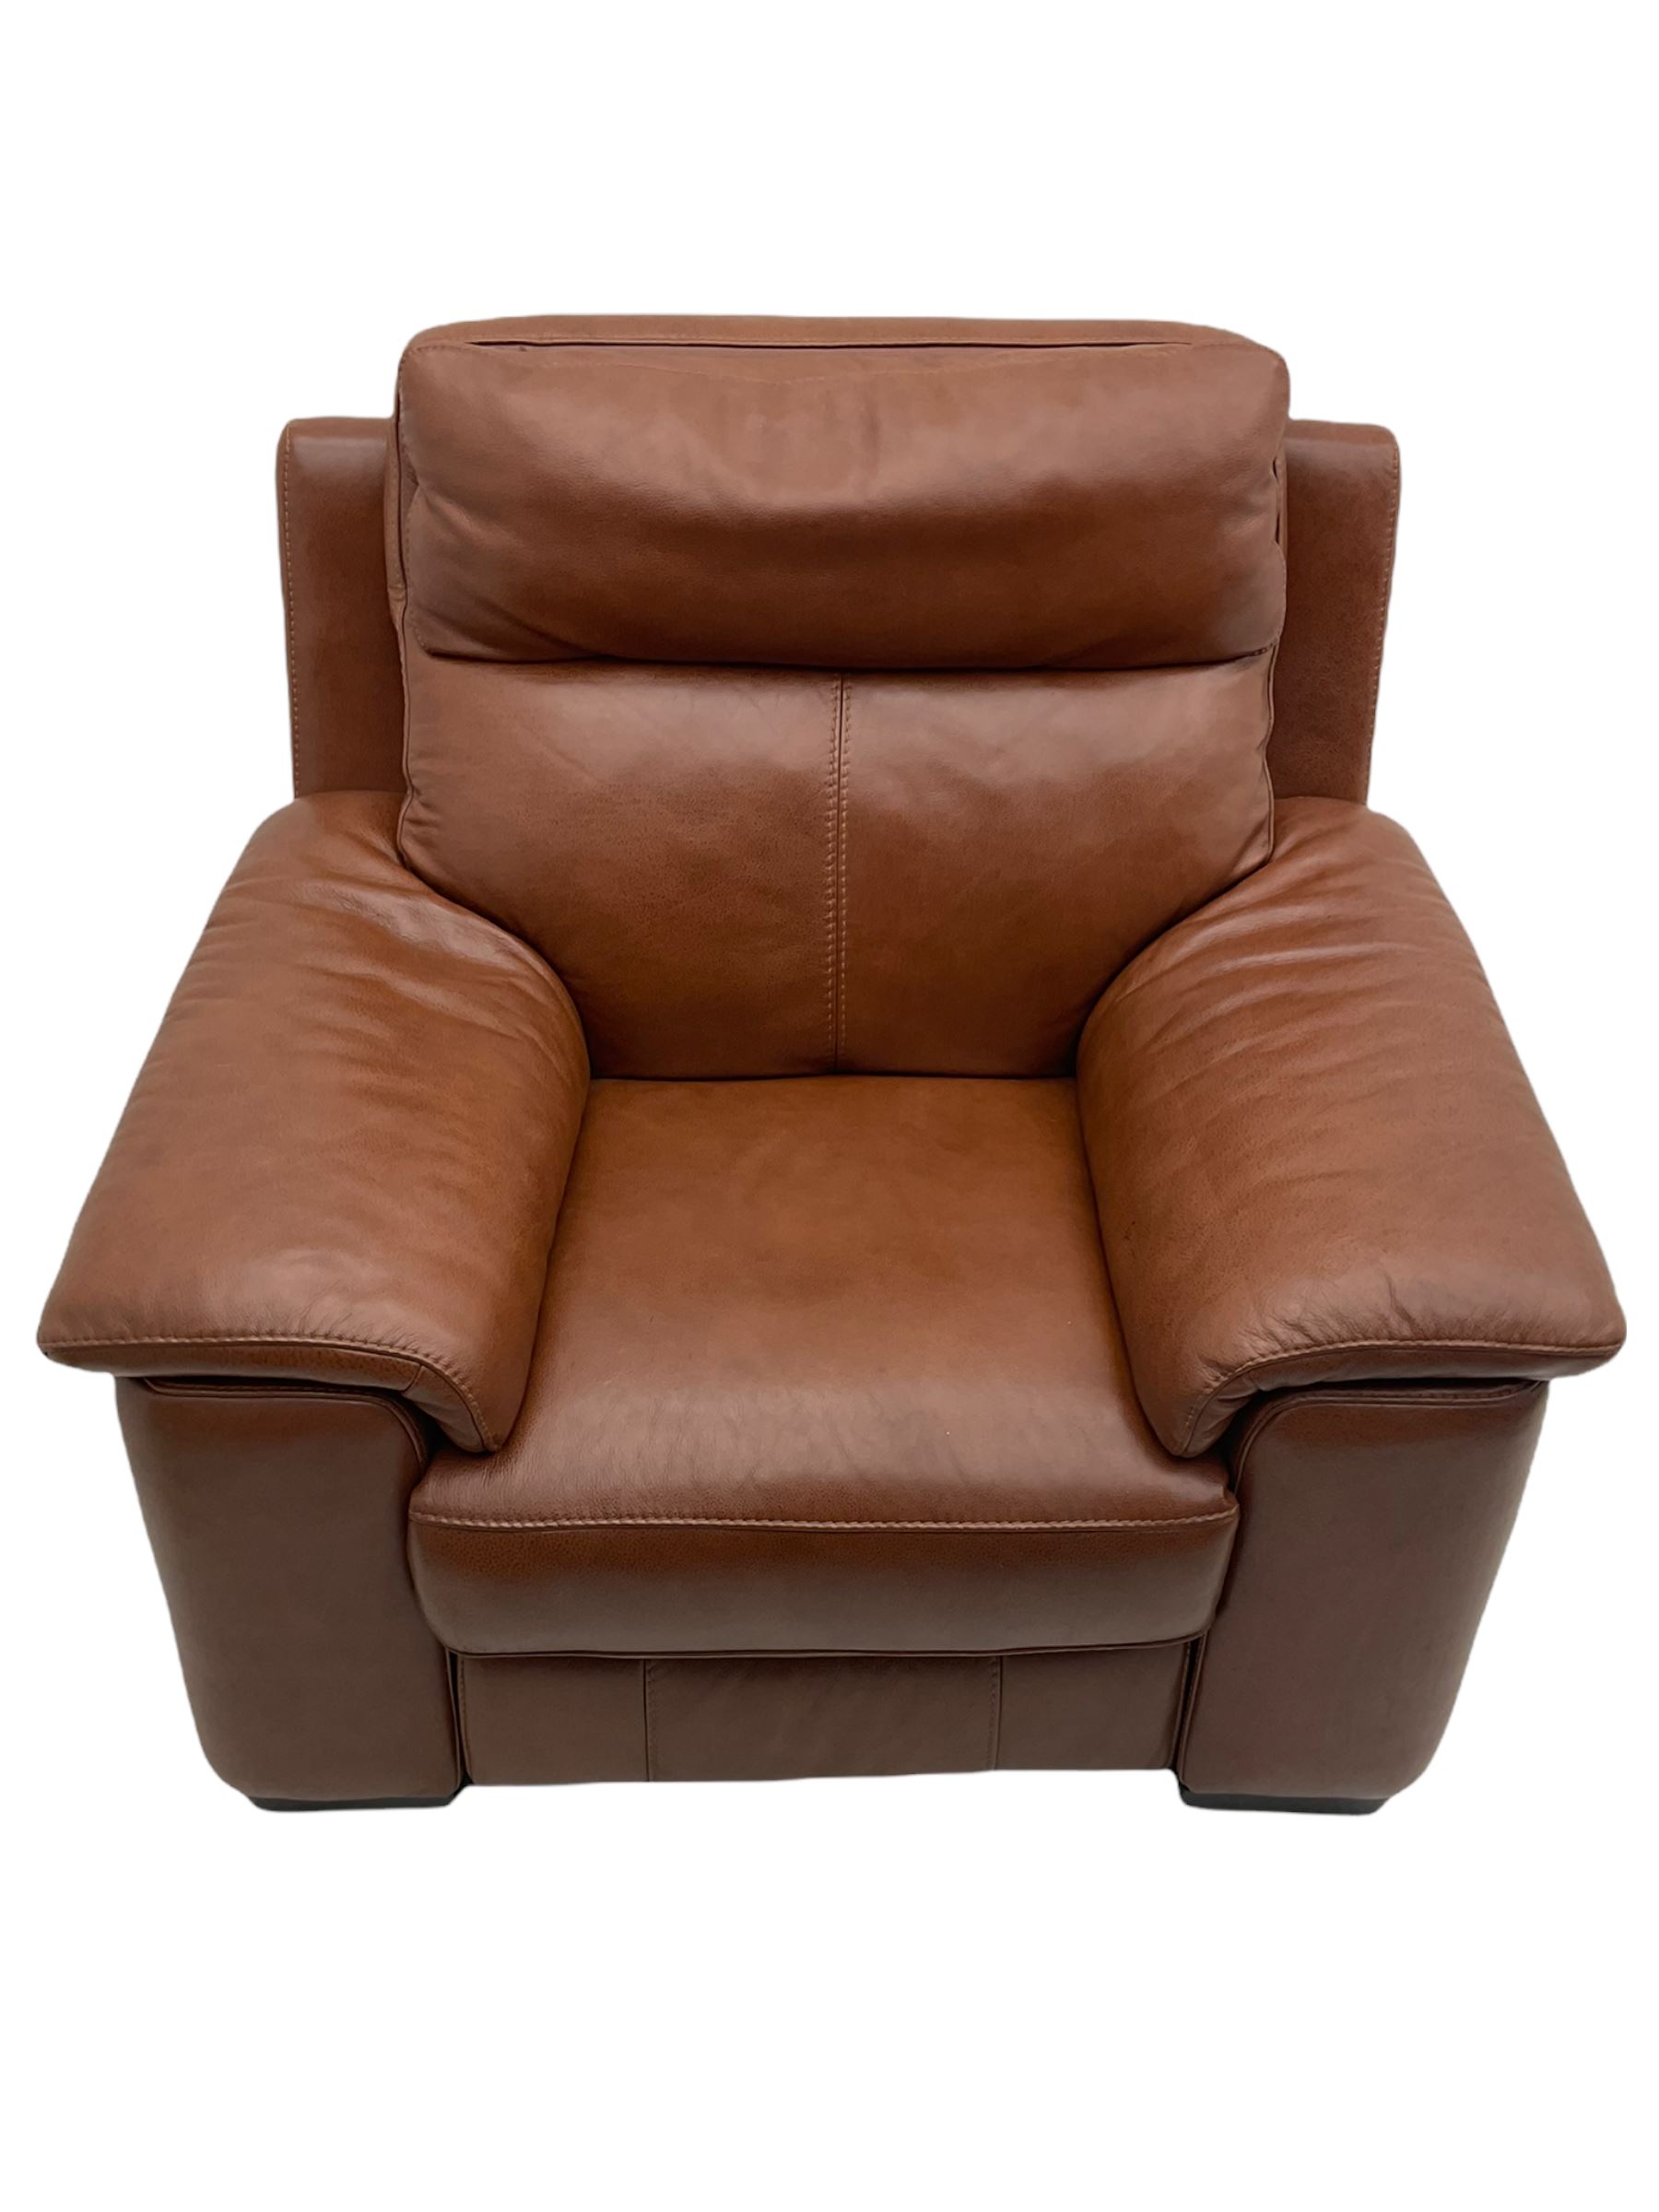 Three electric reclining sofa upholstered in tan leather - Image 12 of 23